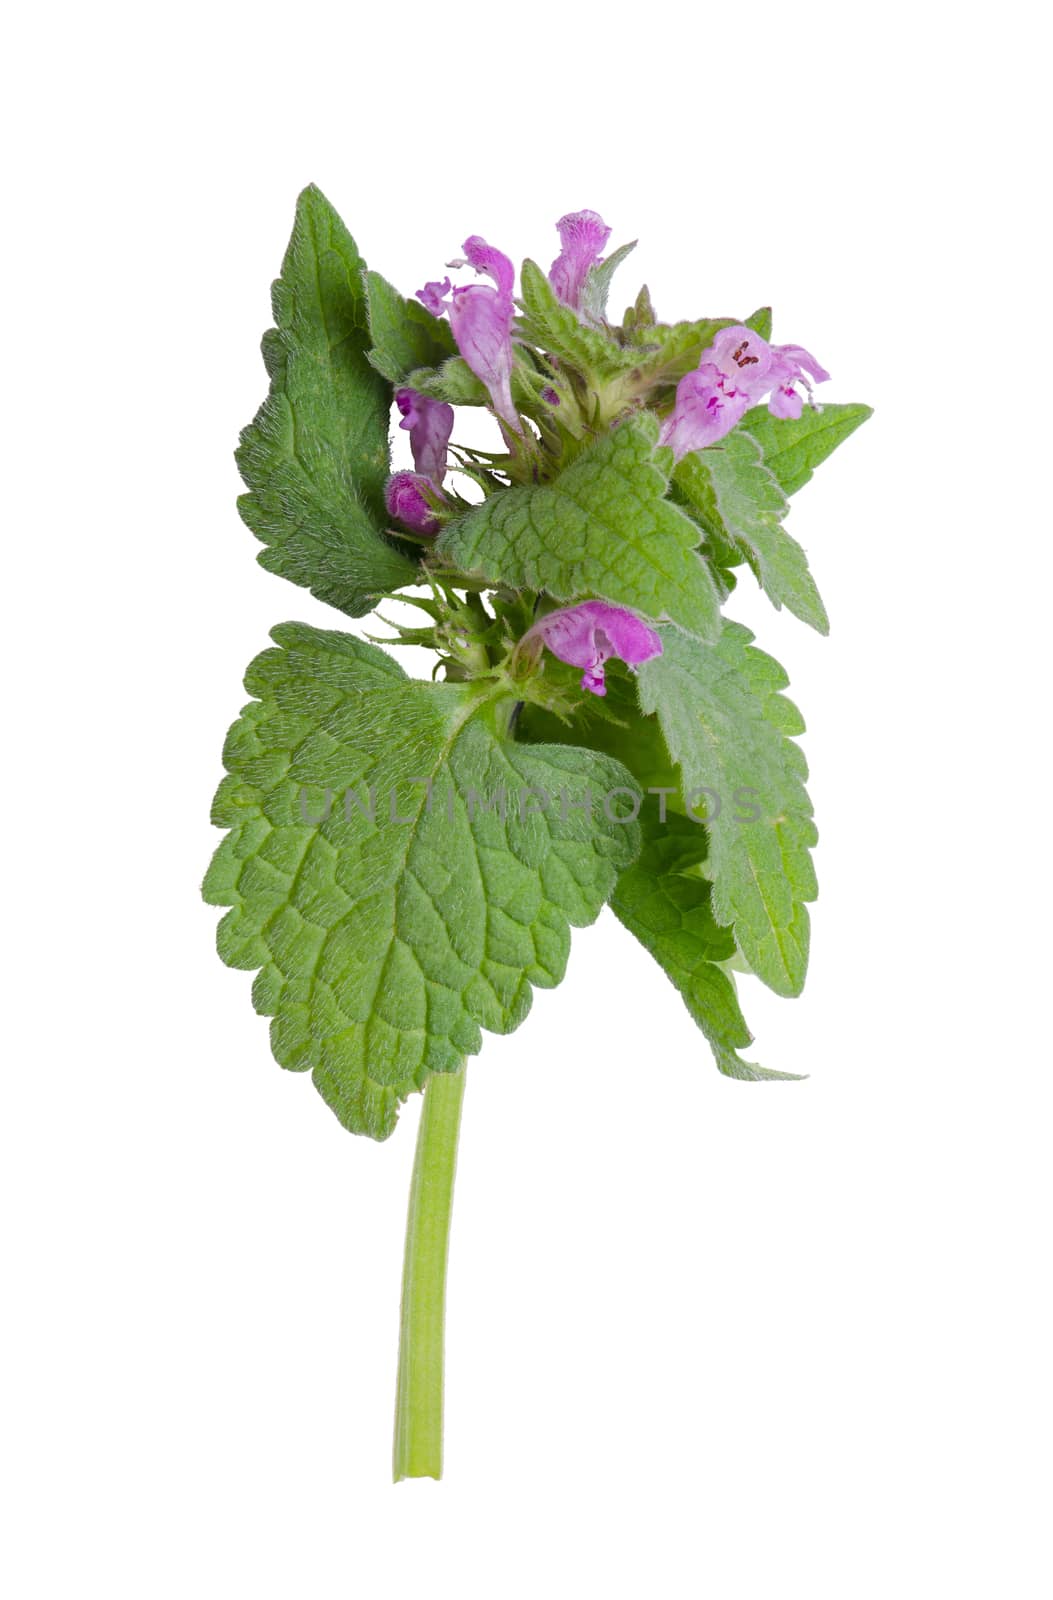 Detail of fresh nettle bloom with leaves.